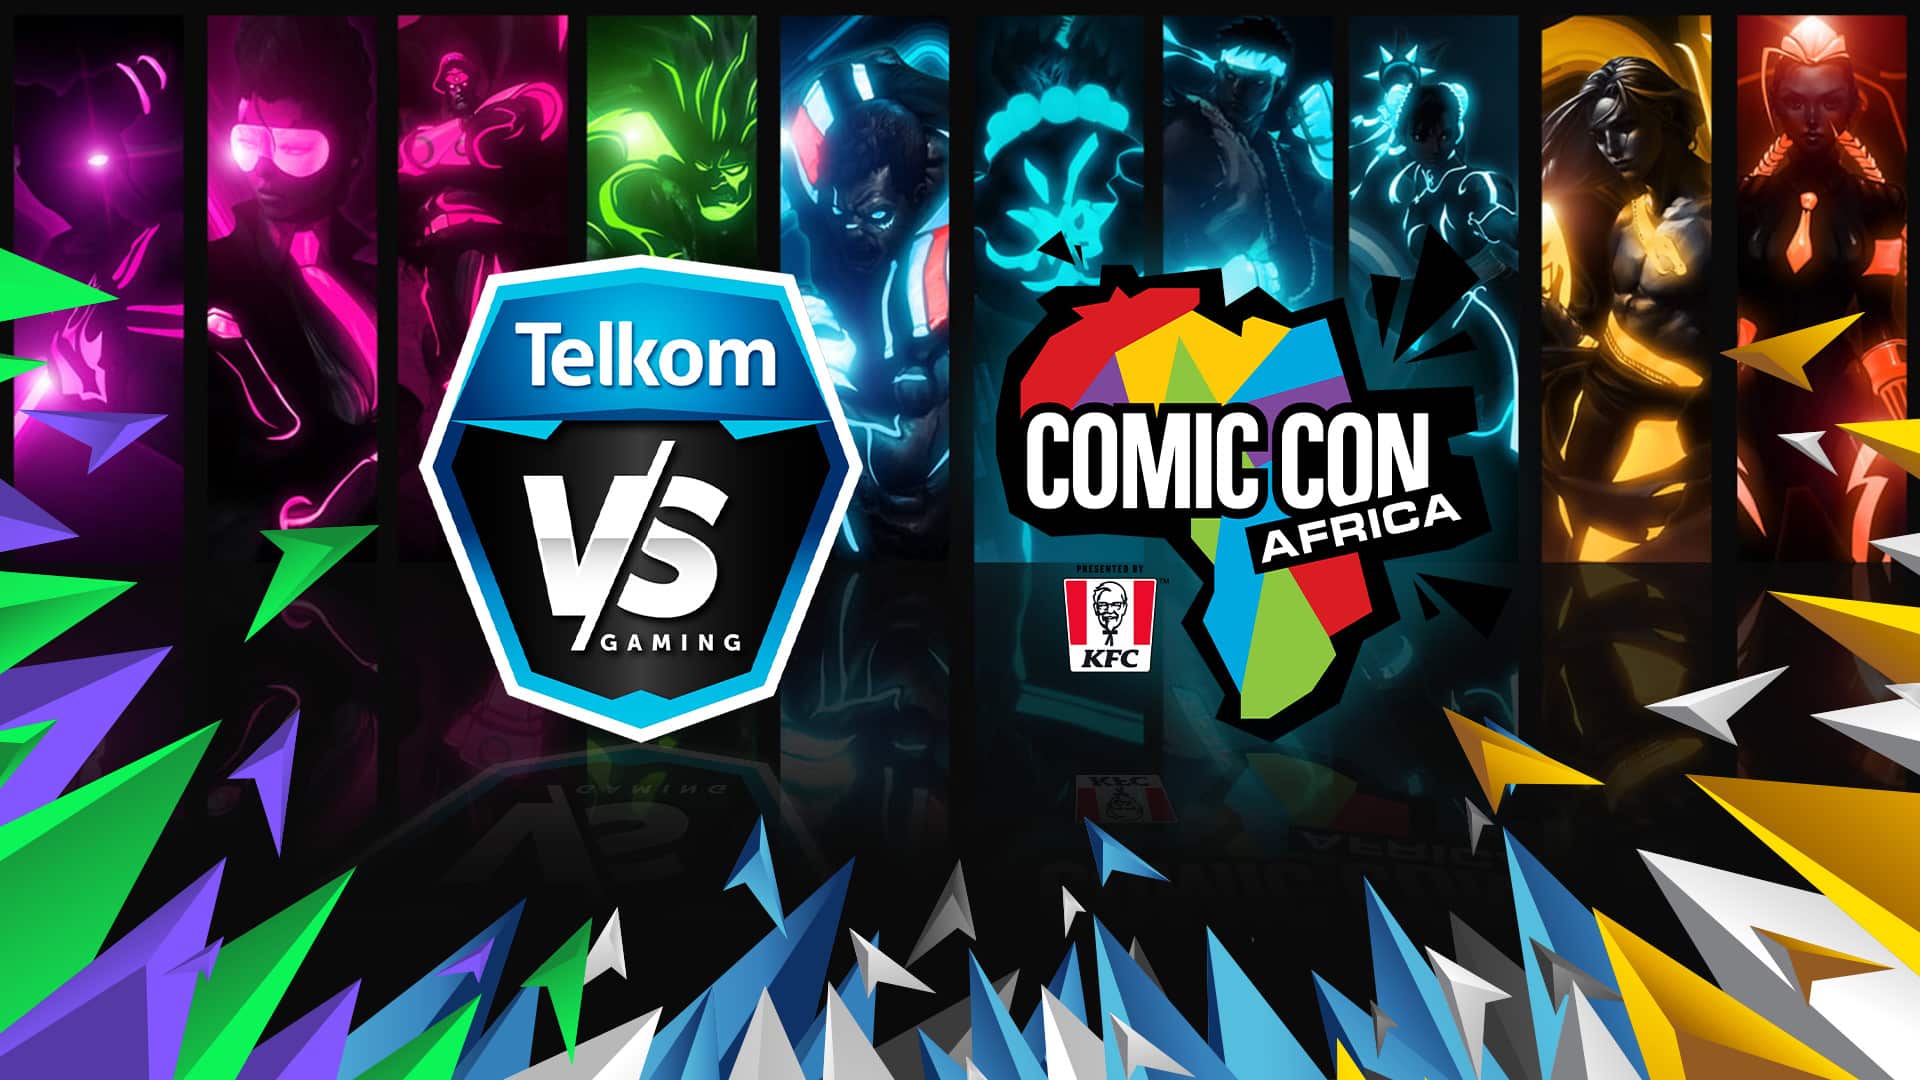 Telkom VS Gaming Partners With Comic Con Africa